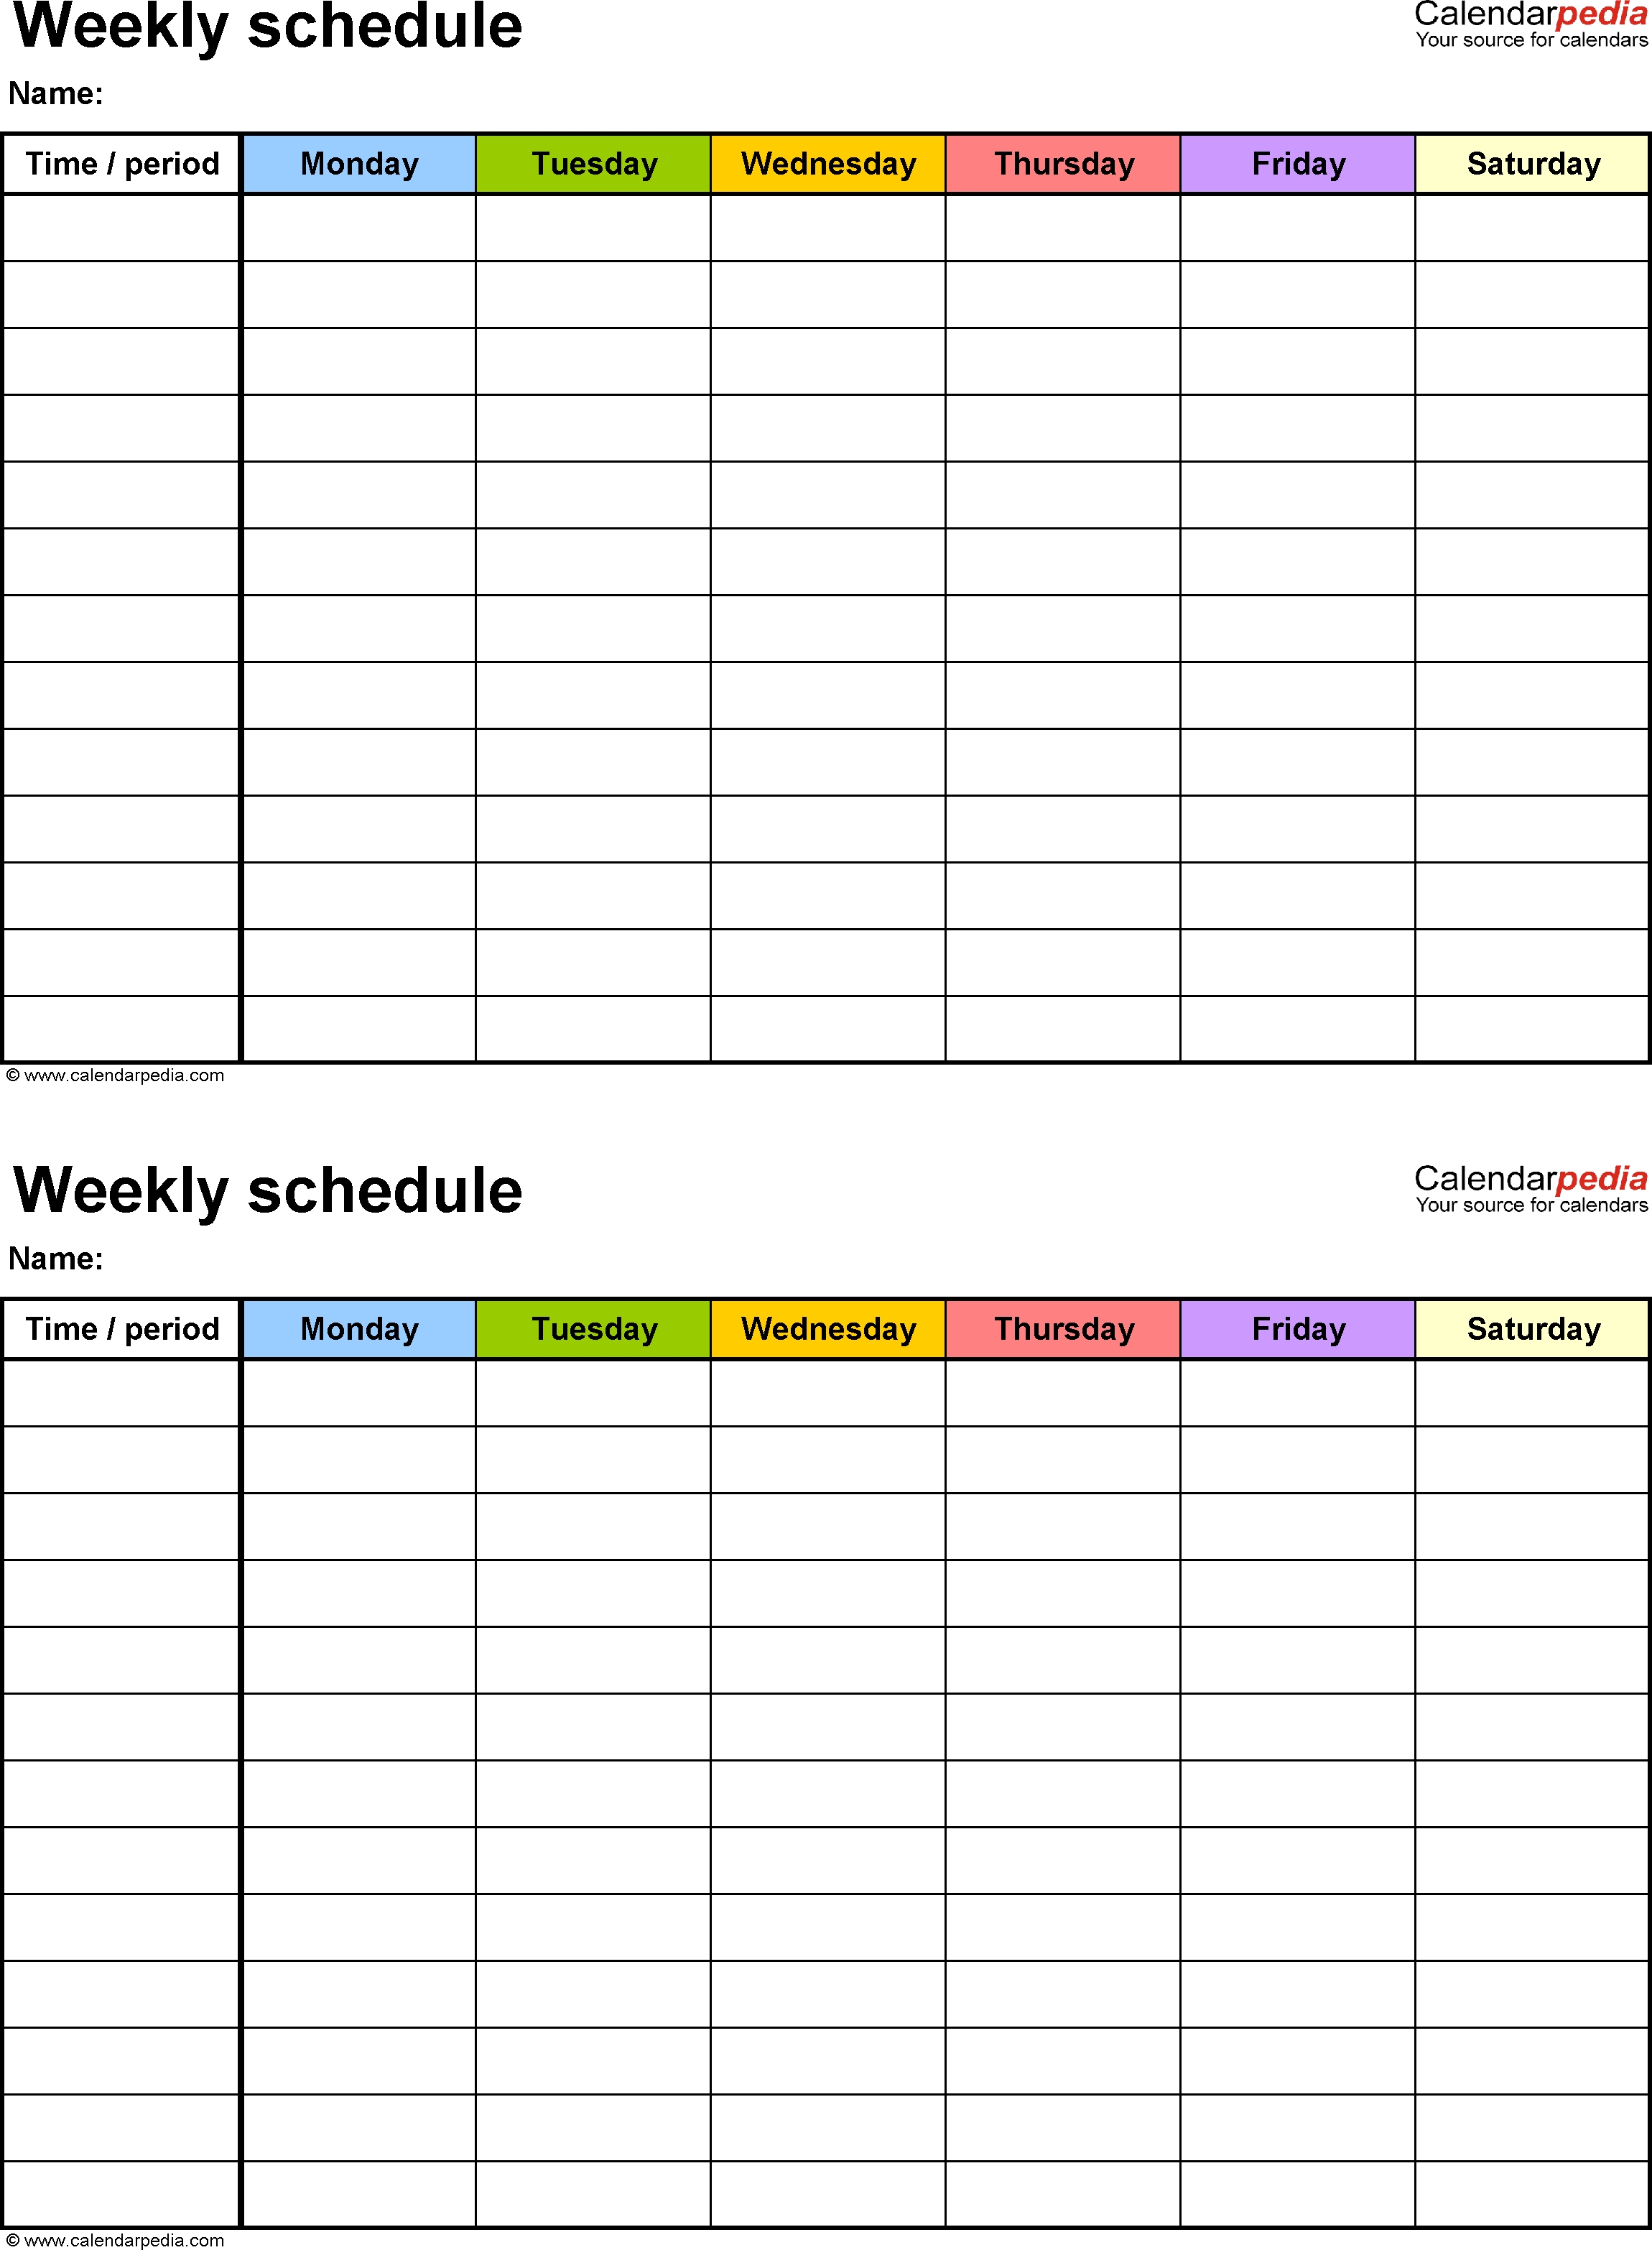 Free Weekly Schedule Templates For Word - 18 Templates Weekly Calendar Template Google Docs